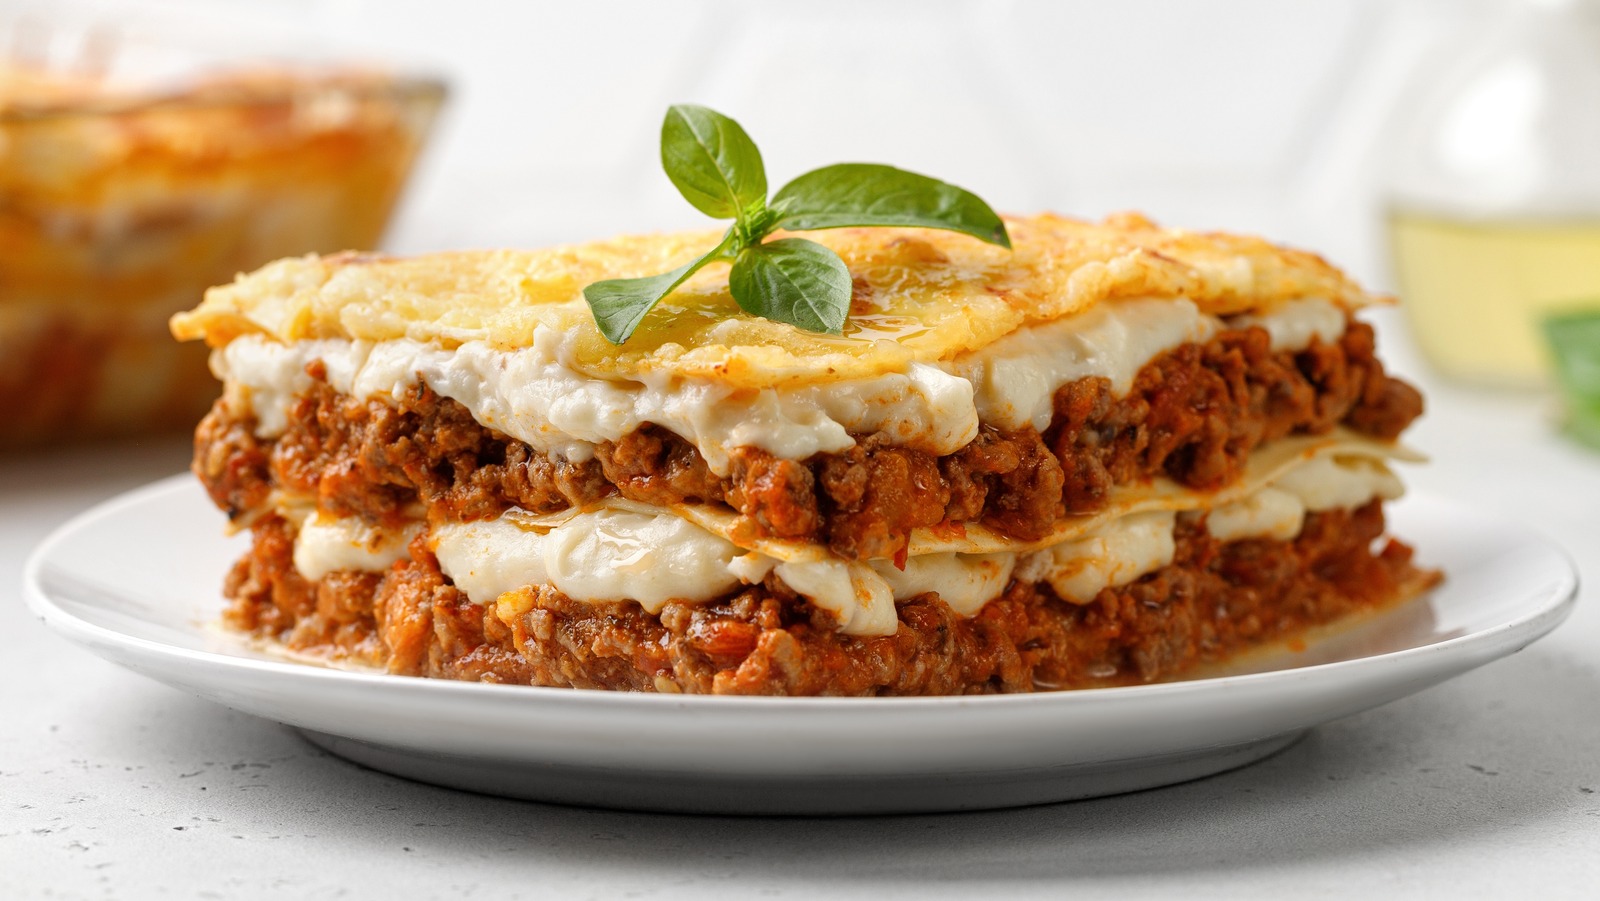 12 Mistakes Everyone Makes When Cooking Lasagna, According To A
Personal Chef